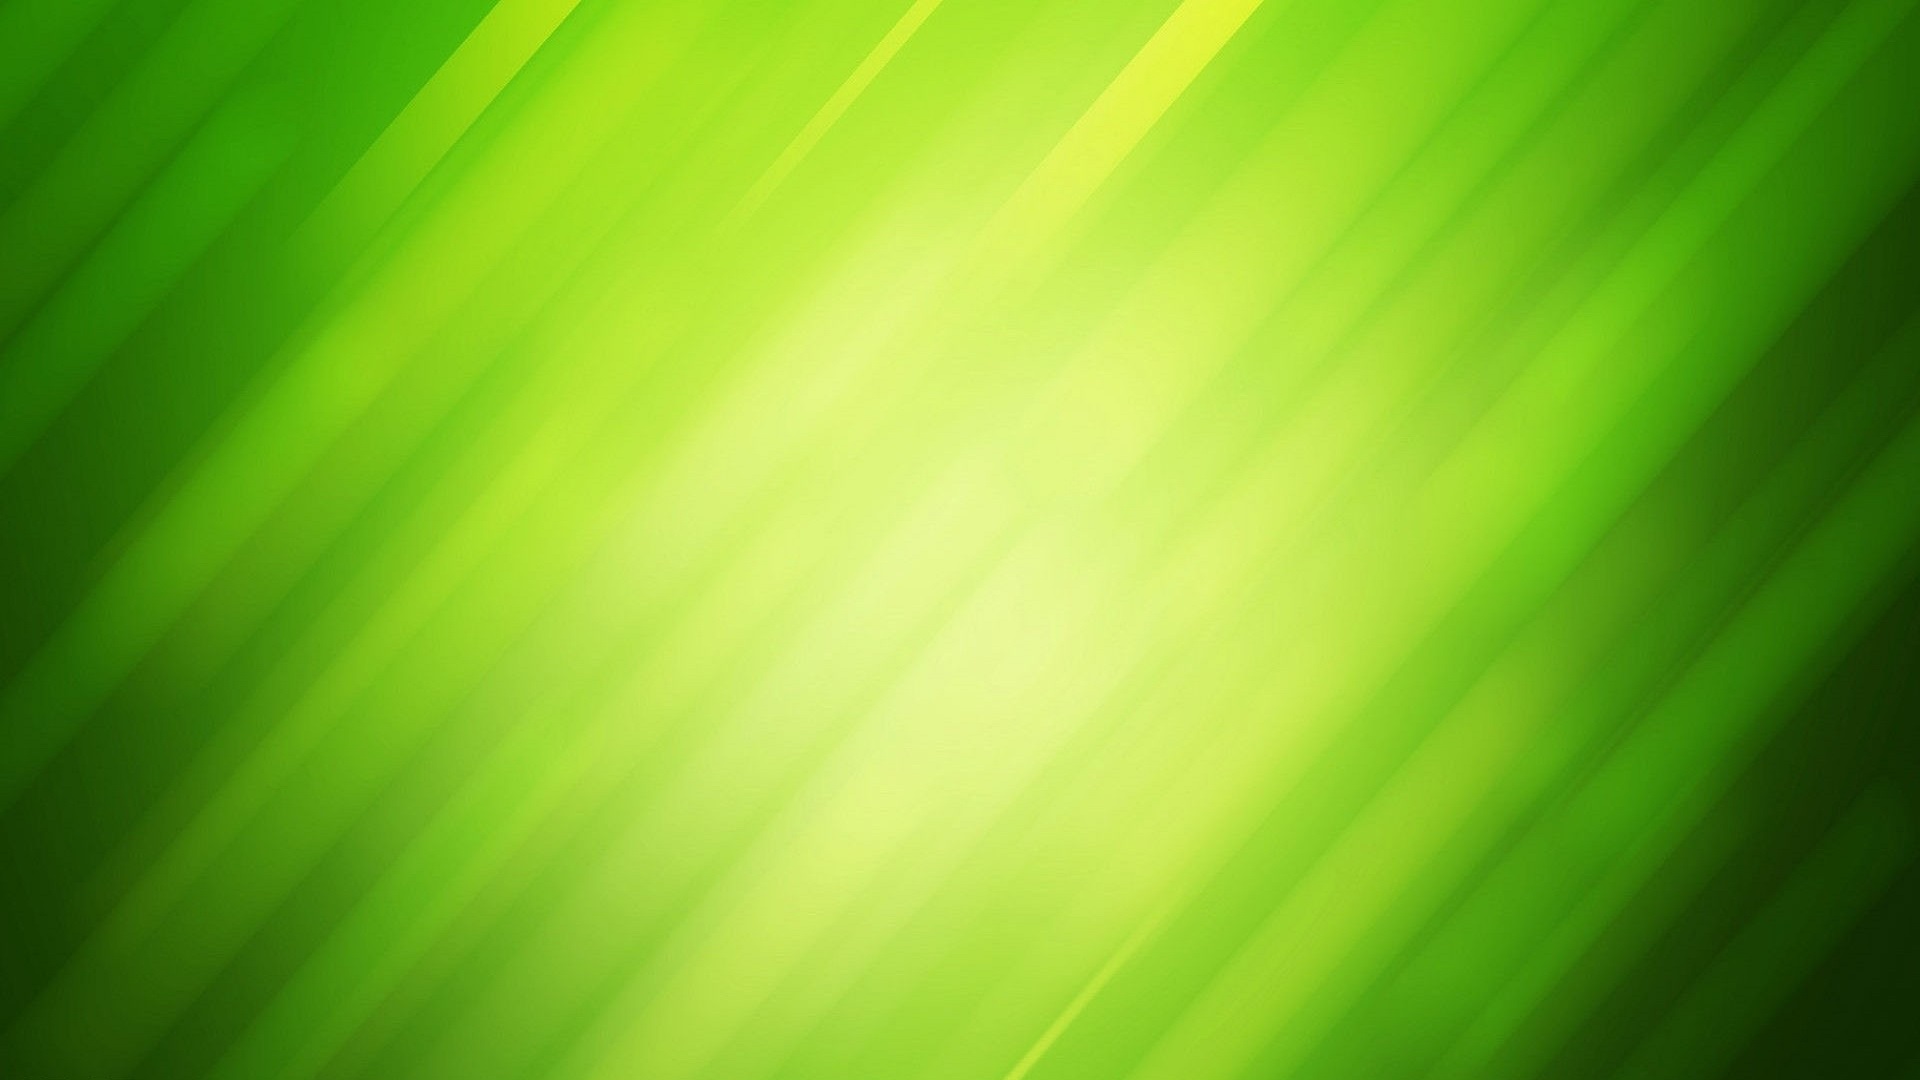 Green And Yellow Background Hd - 1920x1080 Wallpaper 